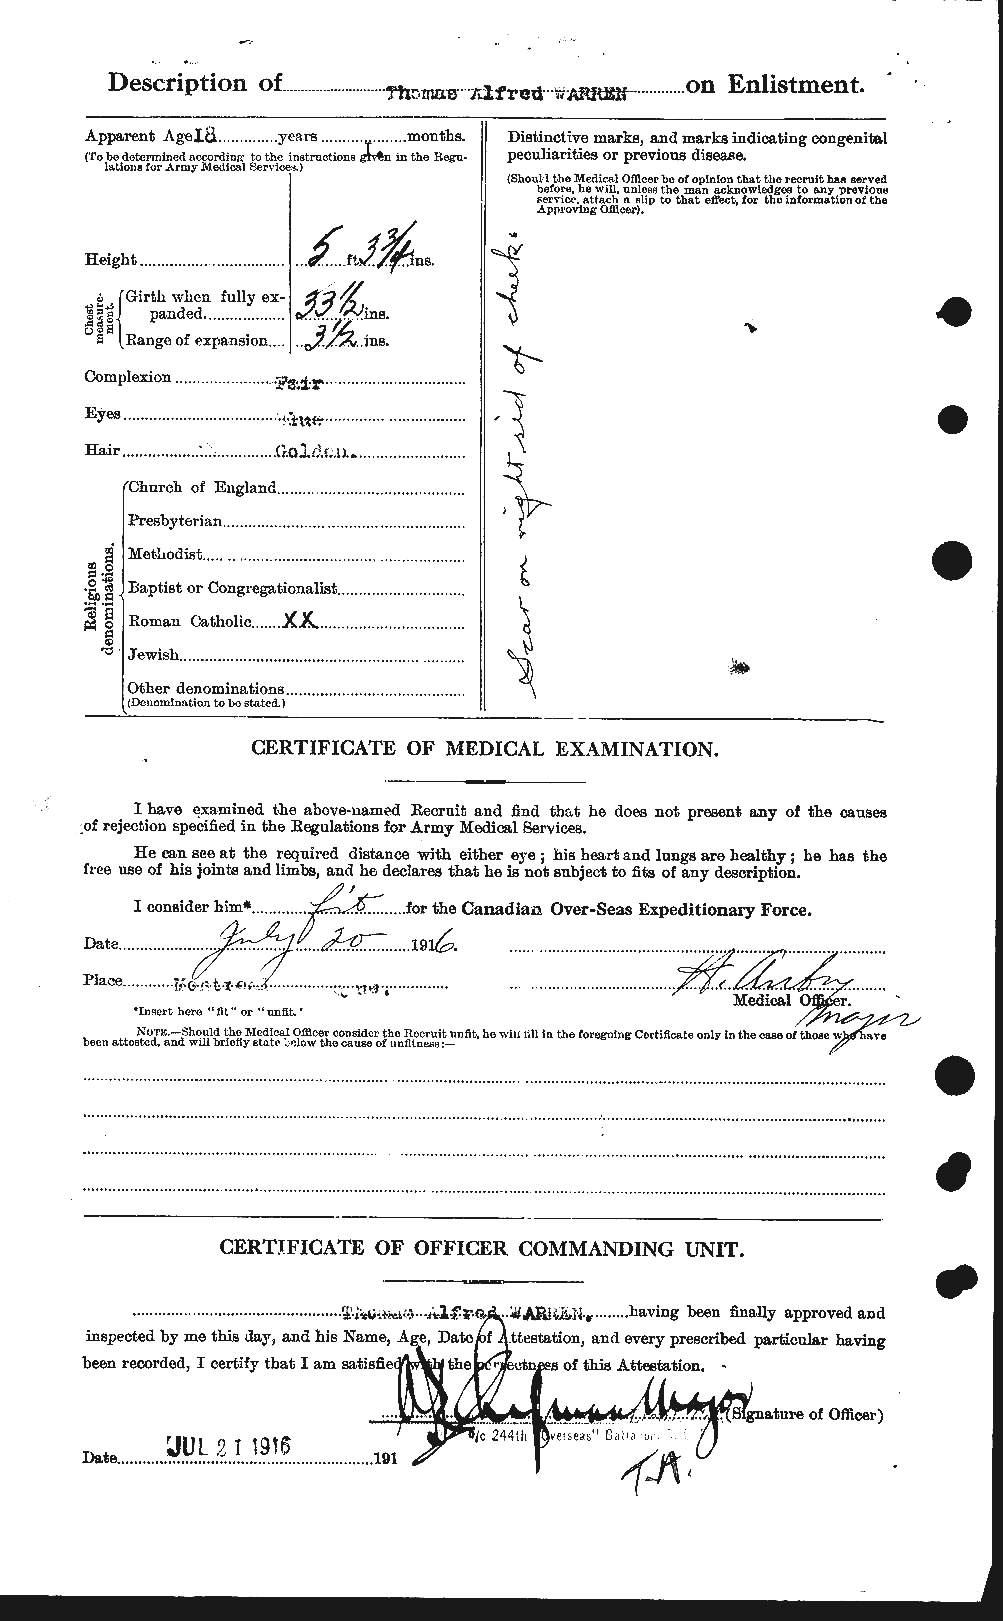 Personnel Records of the First World War - CEF 658642b